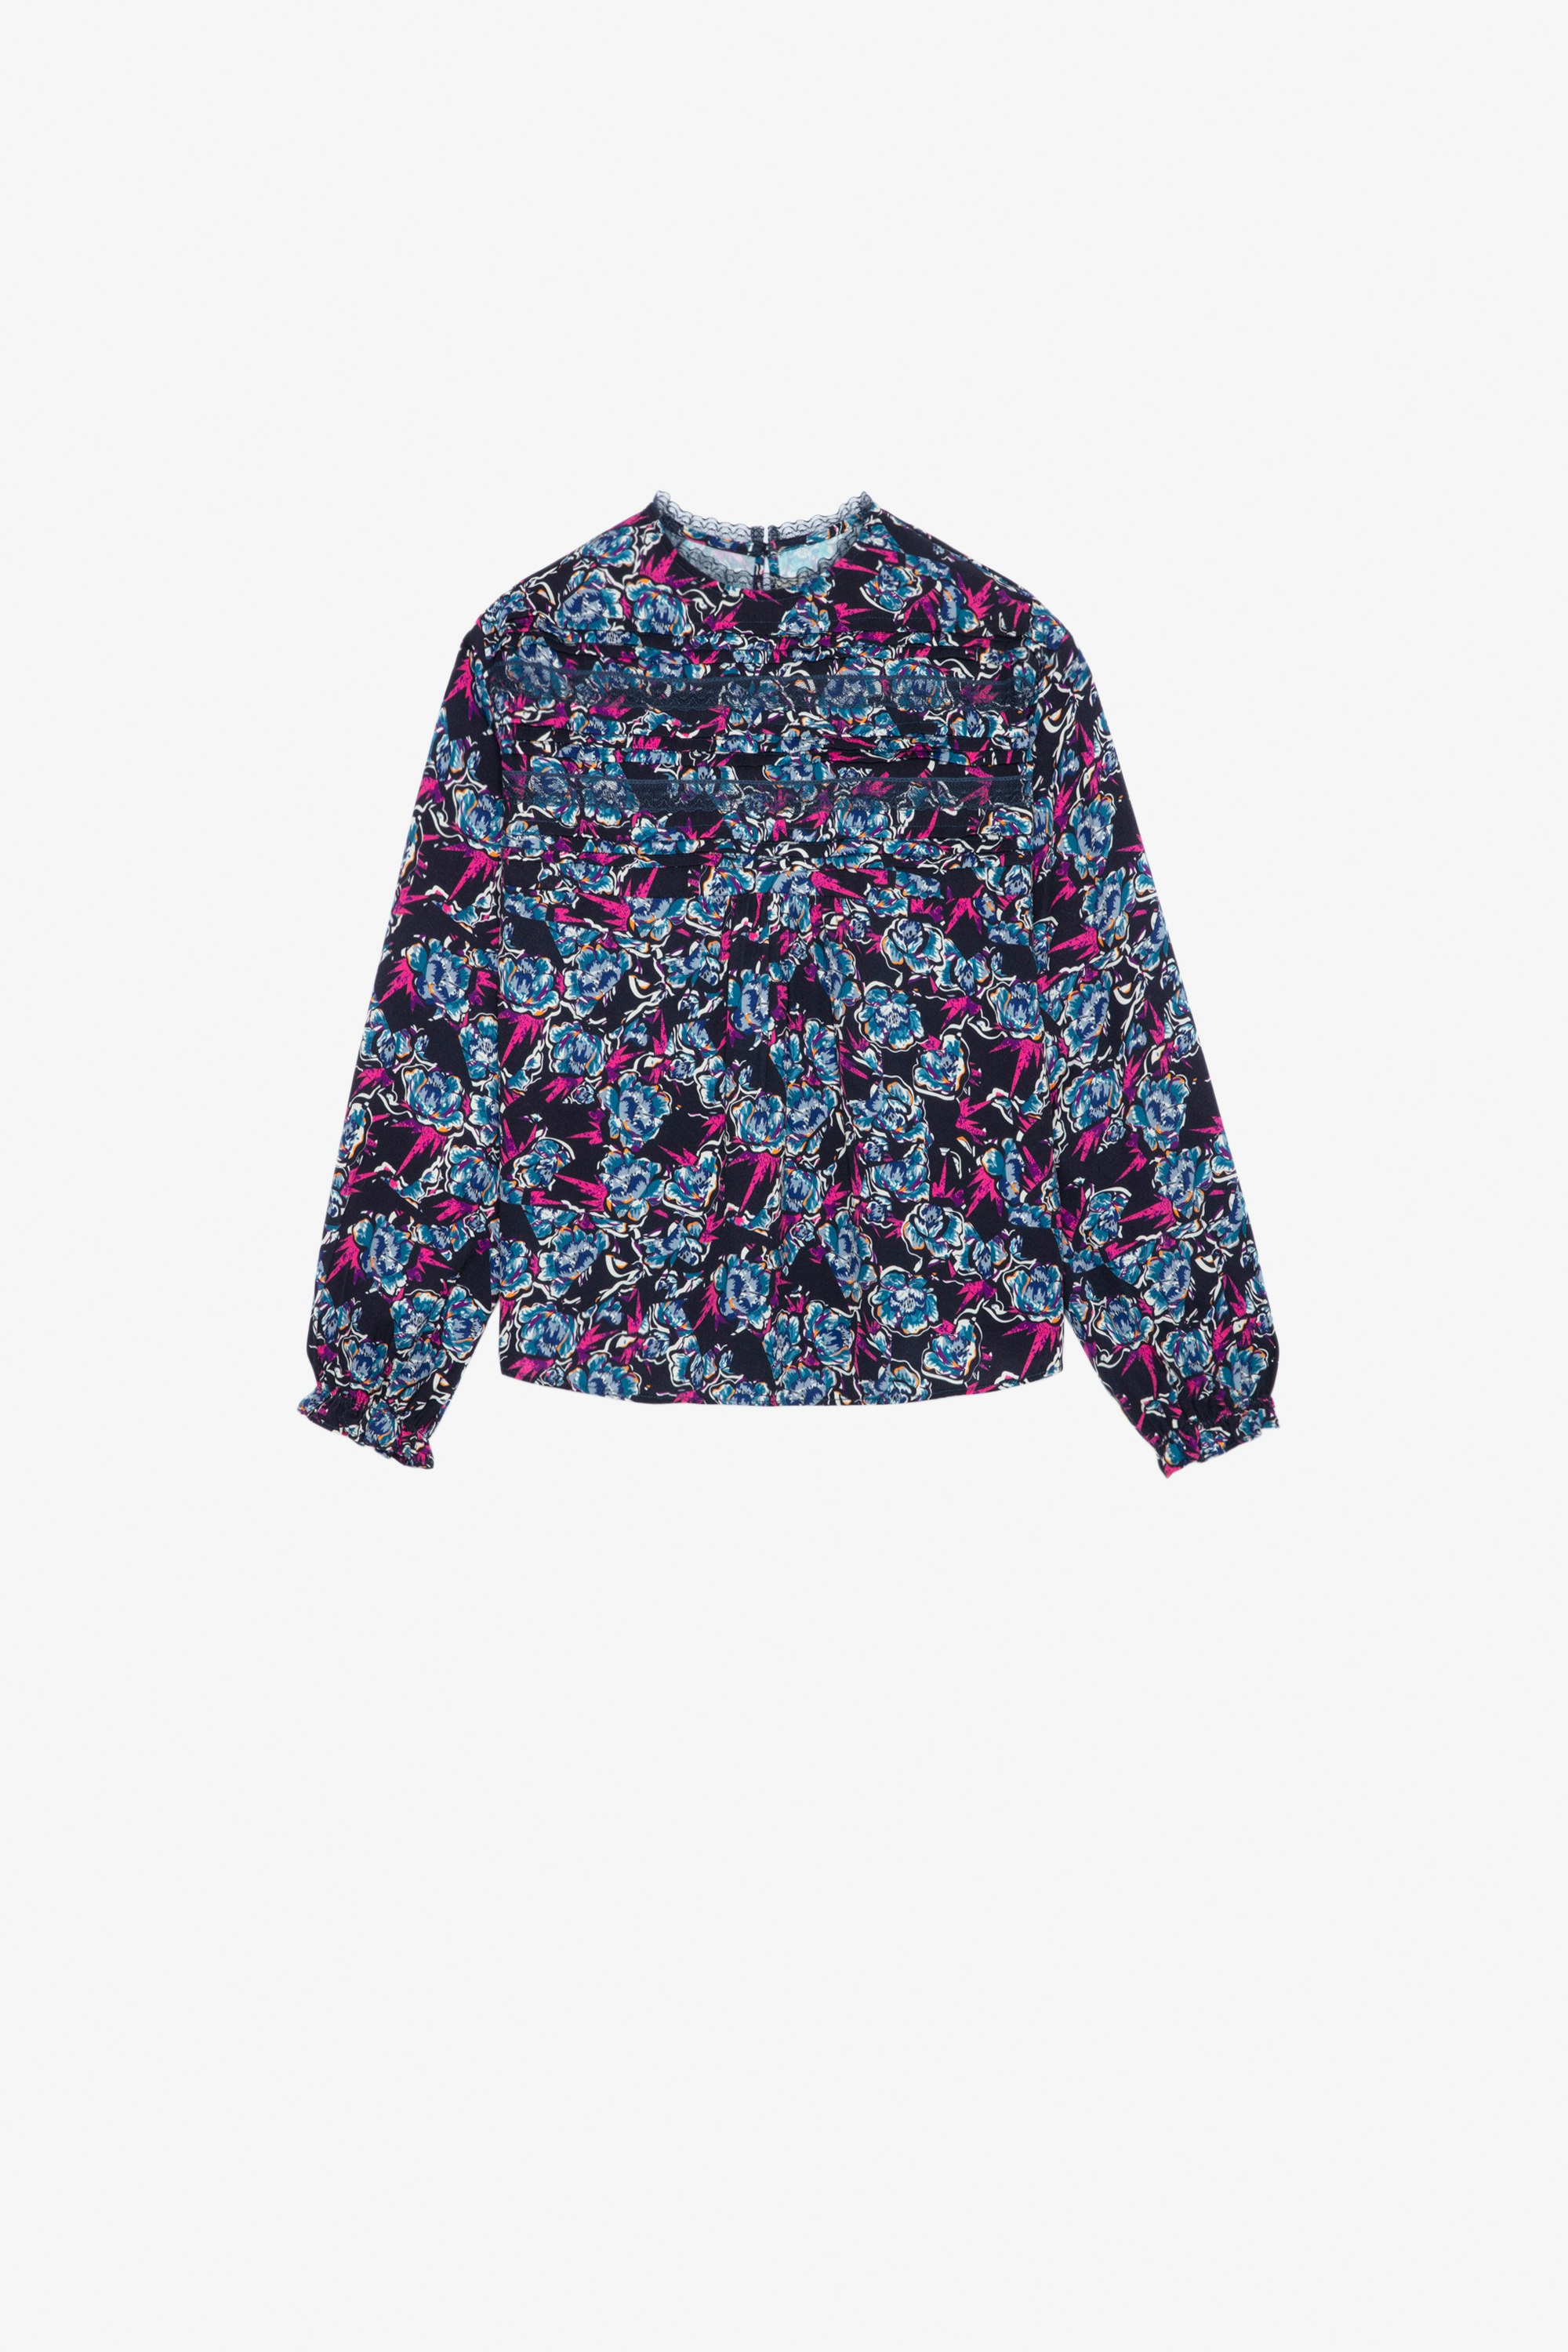 Sahara Girls’ Blouse - Girls’ navy blue blouse with print and lace.